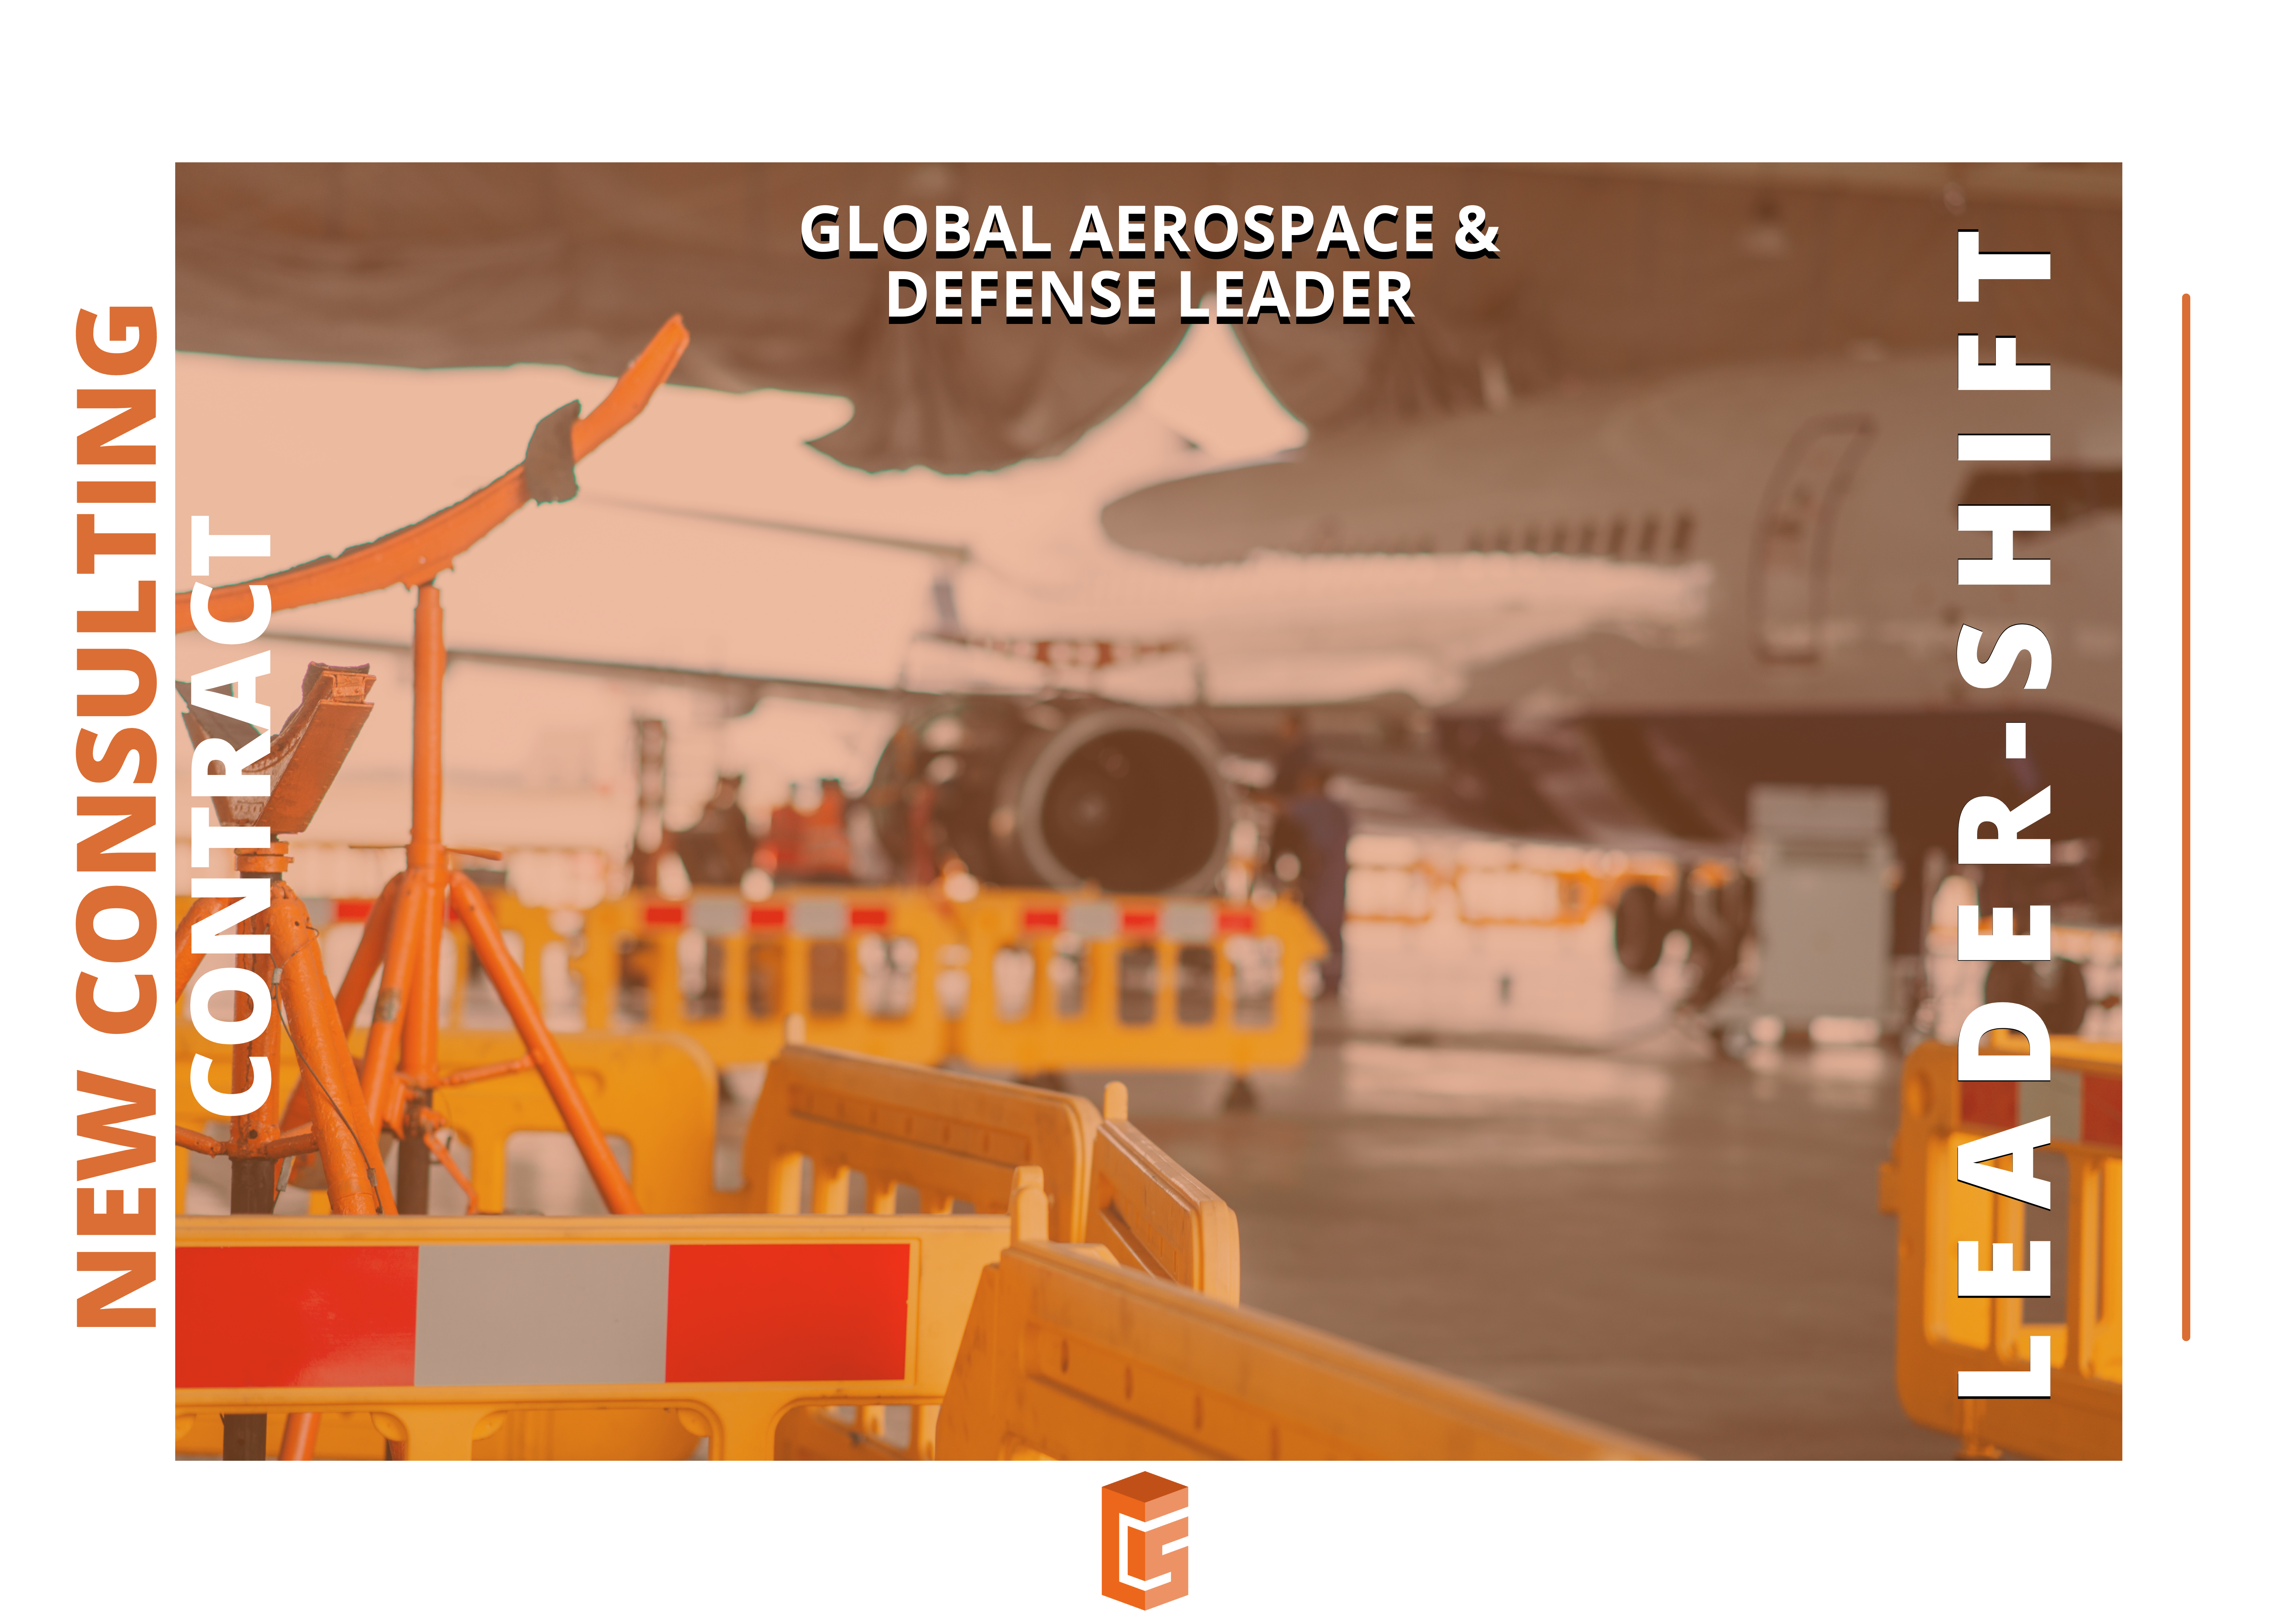 C&S Partners has been awarded a consulting contract by a global aerospace & defense leader to review their Talent Management strategy. The project will mobilize the expertise of our “Leader-Shift” poles in Paris & Anglet.